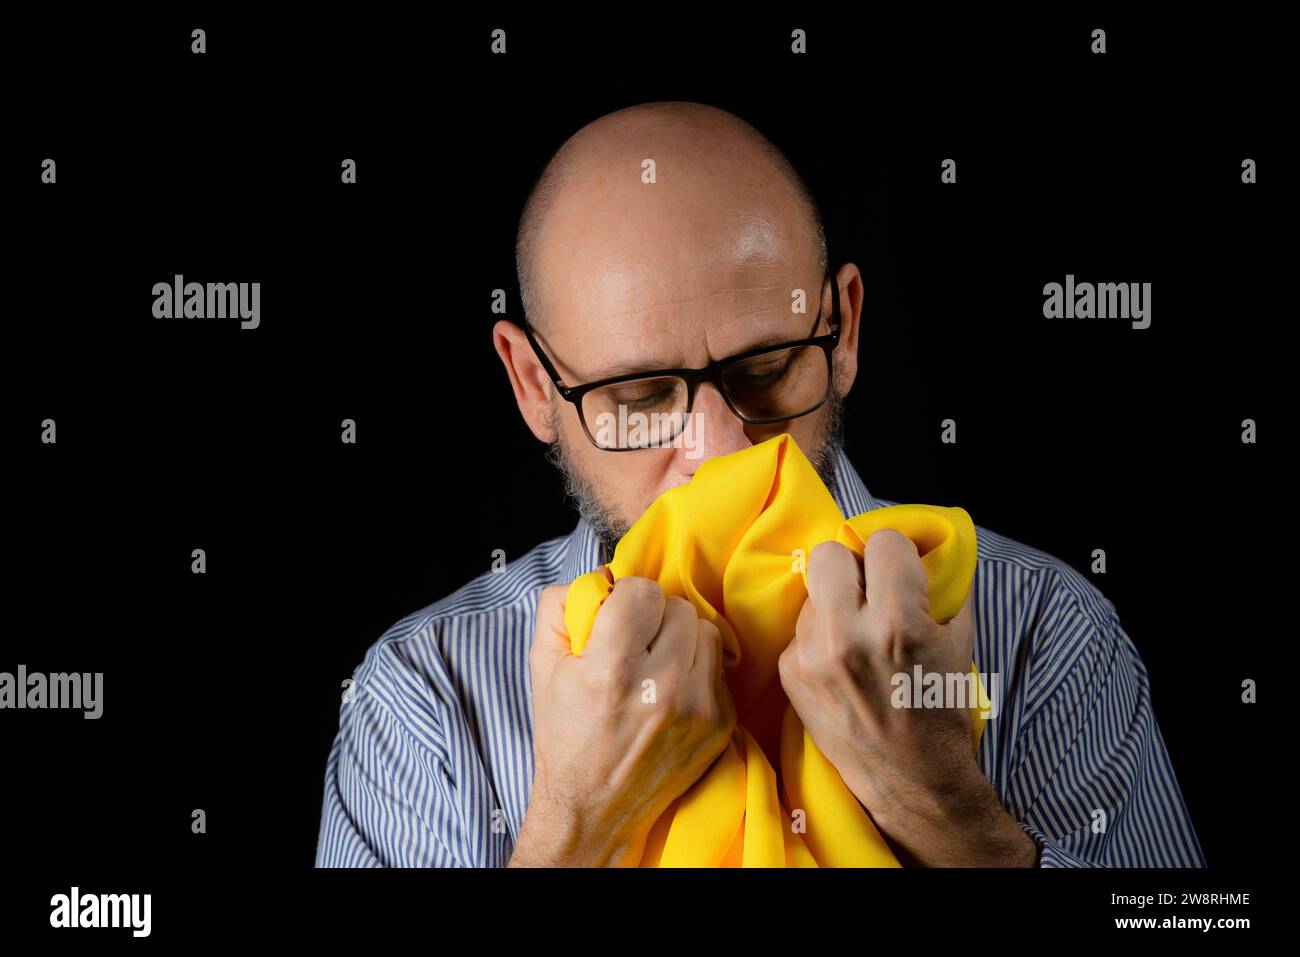 Bald, bearded man with glasses holding yellow colored cloth over his head against black background. Stock Photo